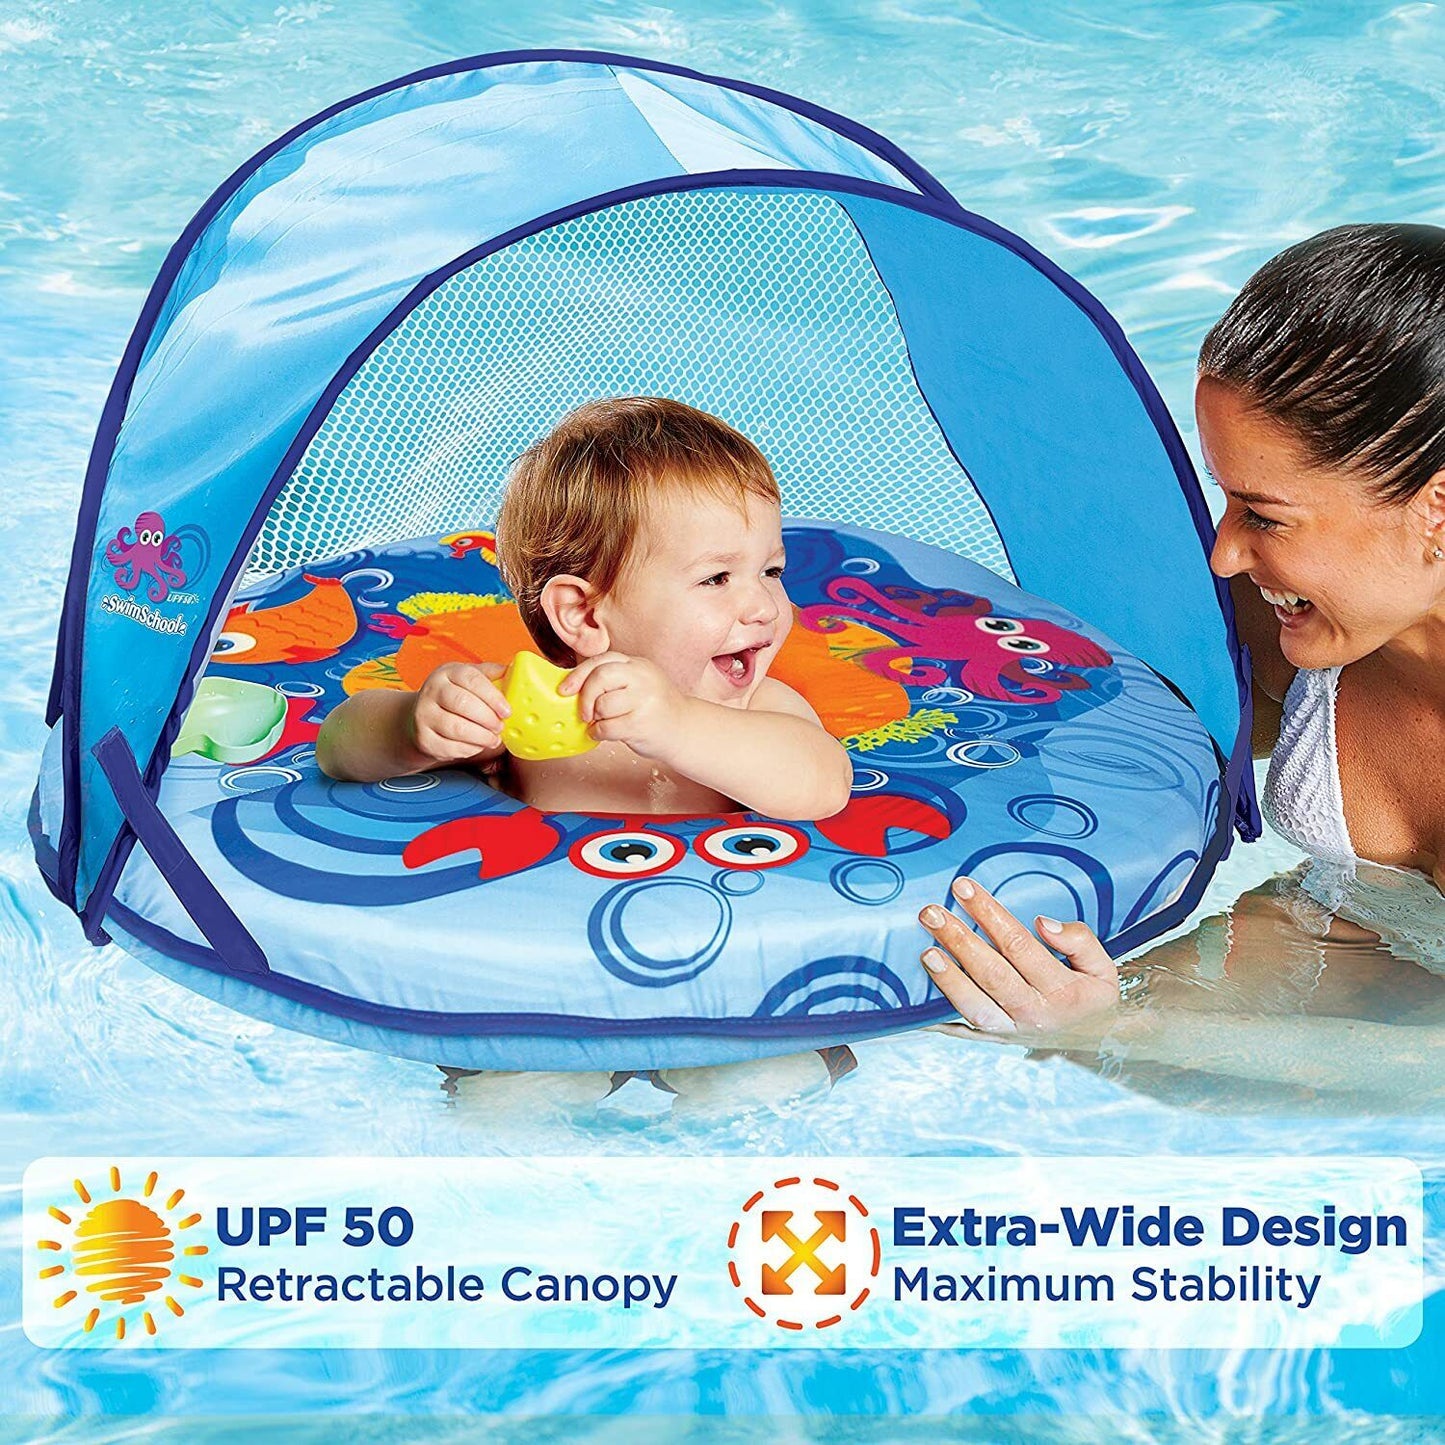 Swim School Self-Inflating Baby Float with Adjustable Canopy - 6-24 Months